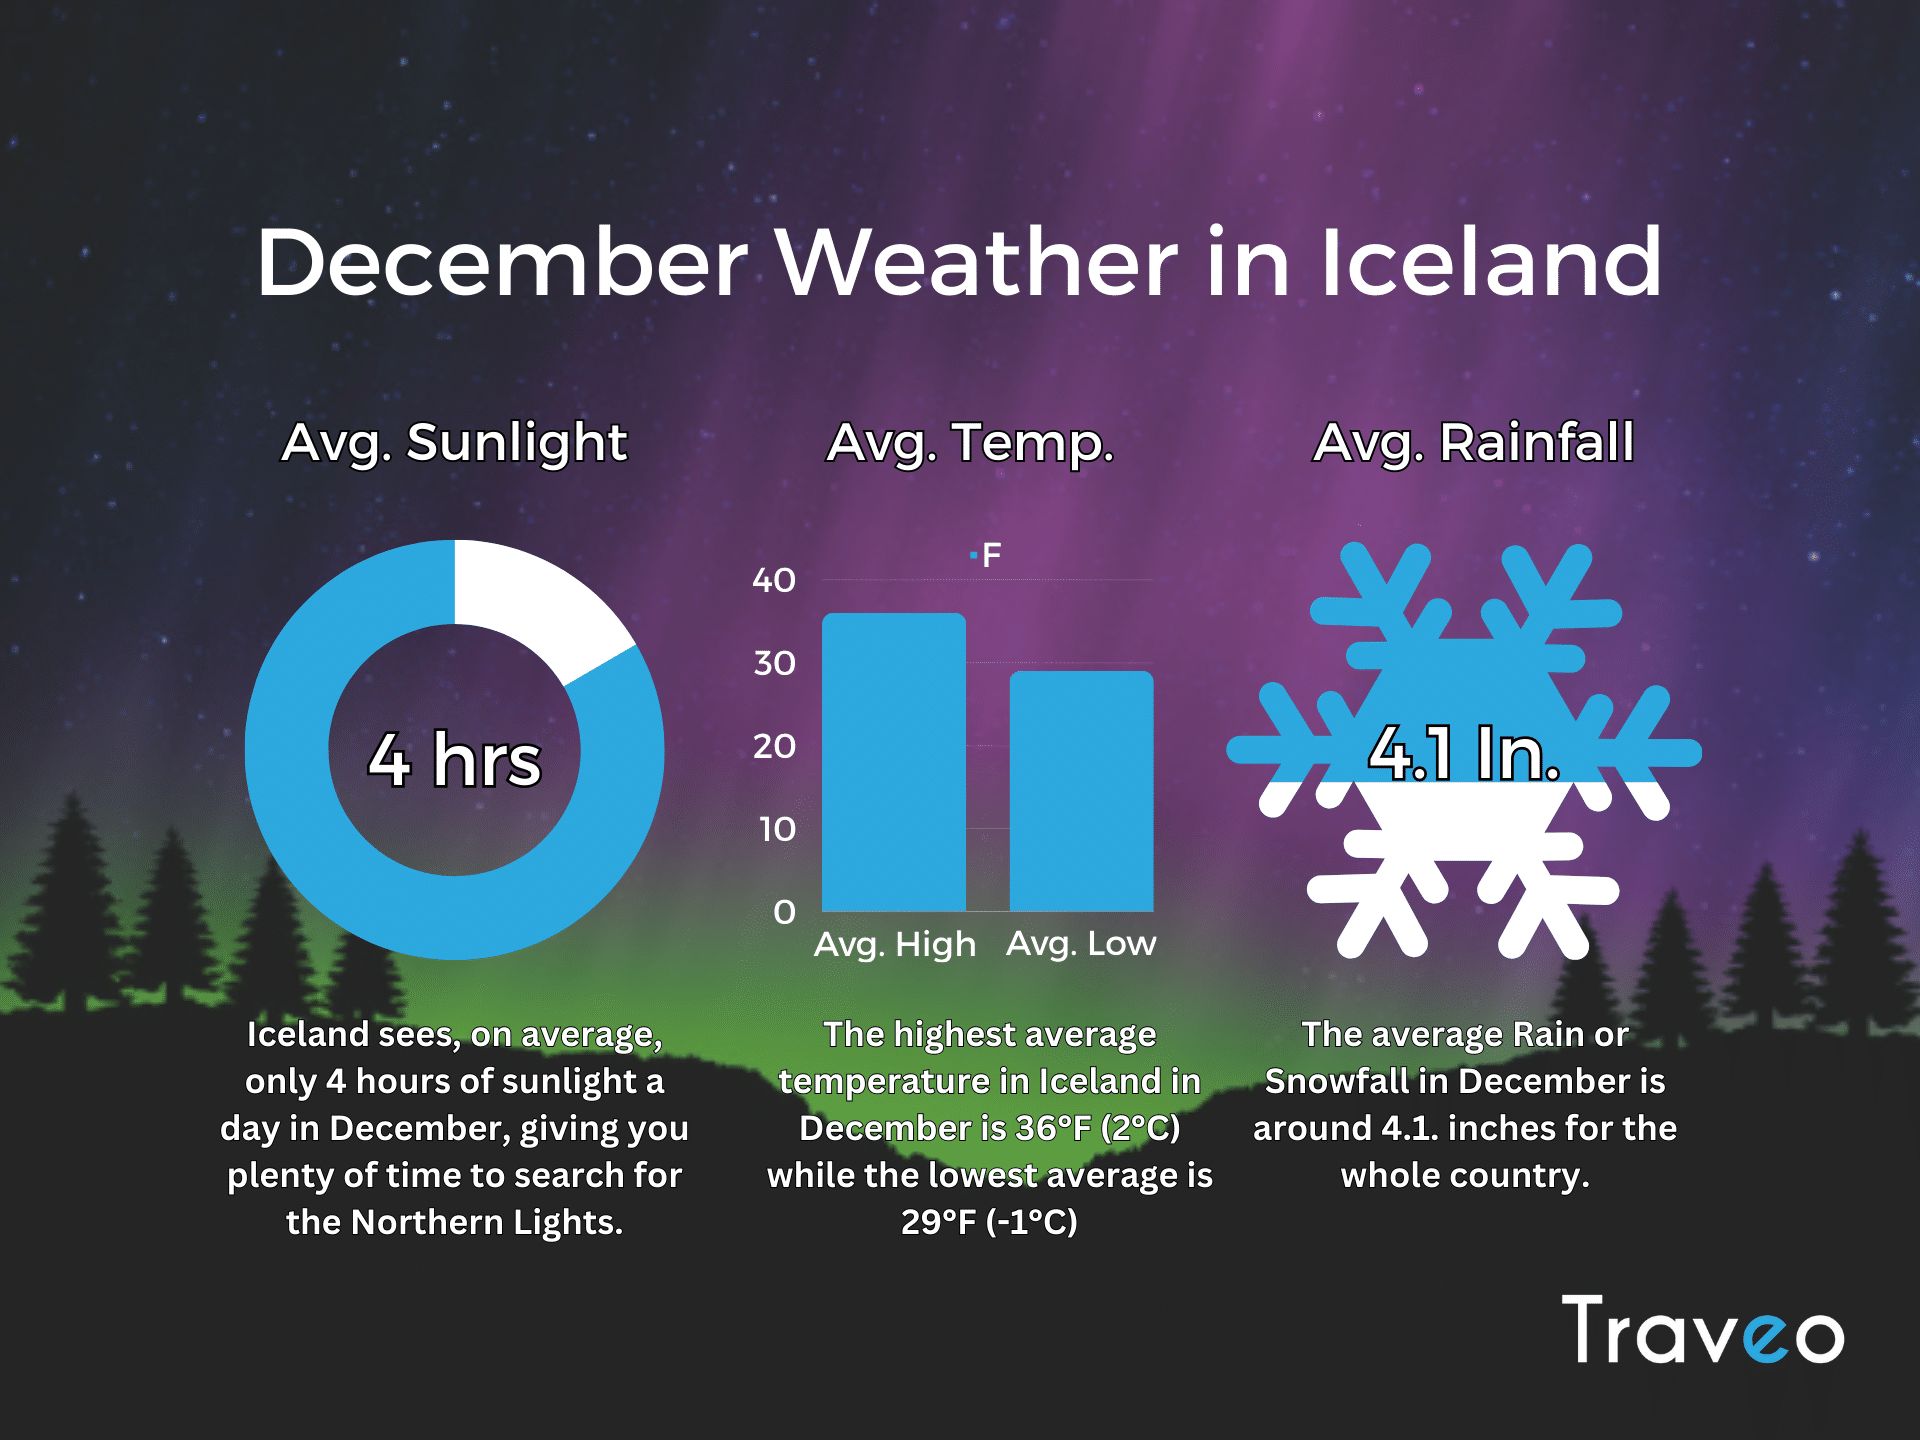 A graph showing weather averages in Iceland in December.